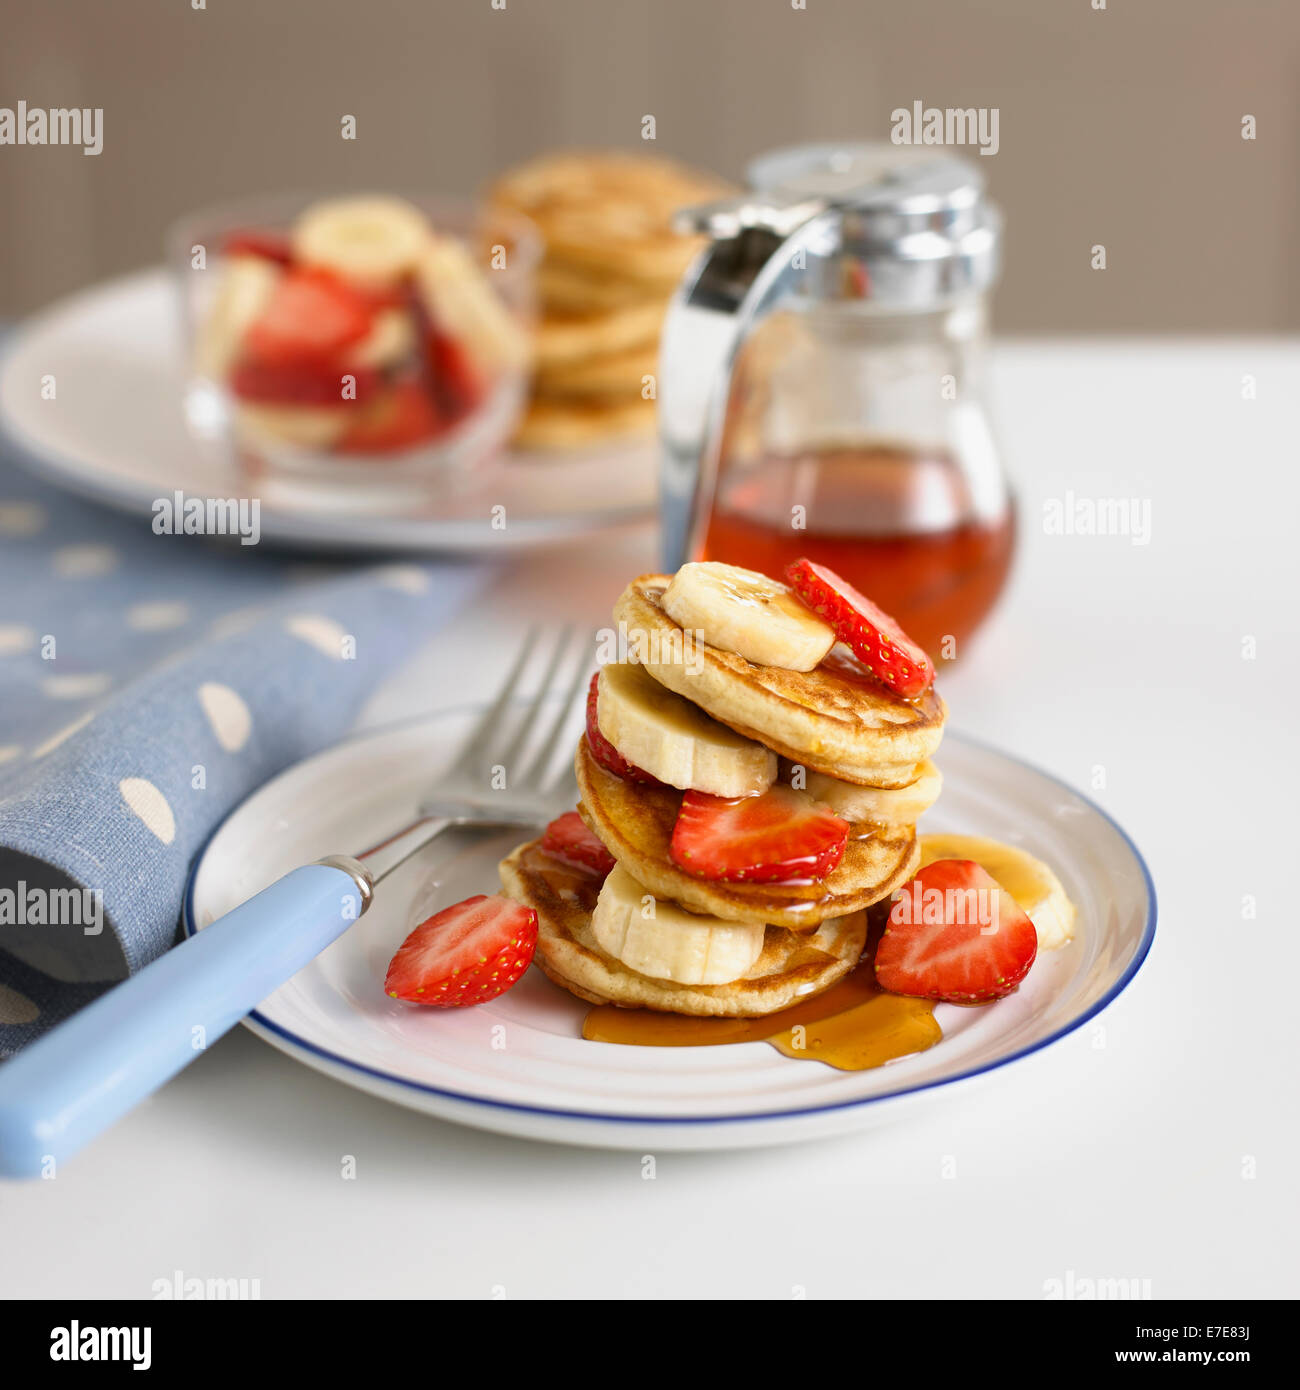 Plate of fruit and pancakes Stock Photo